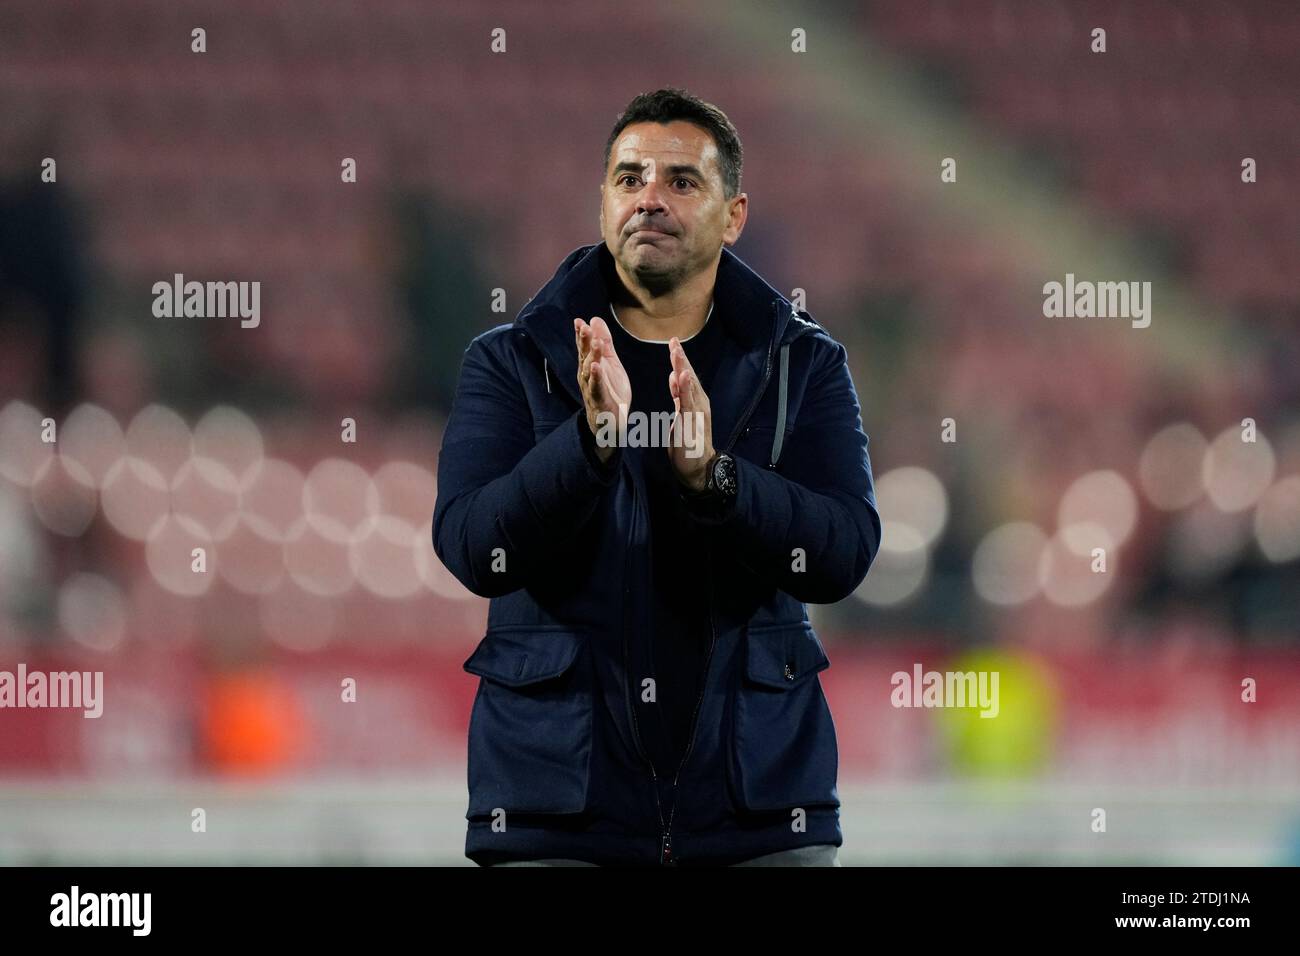 Girona, Spain. 18th Dec, 2023. Miguel Angel Sanchez coach (Girona FC) is pictured during La Liga football match between Girona FC and Deportivo Alaves, at Montilivi Stadium on Monday, December 18, 2023 in Girona, Spain. Foto: Siu Wu Credit: dpa/Alamy Live News Stock Photo